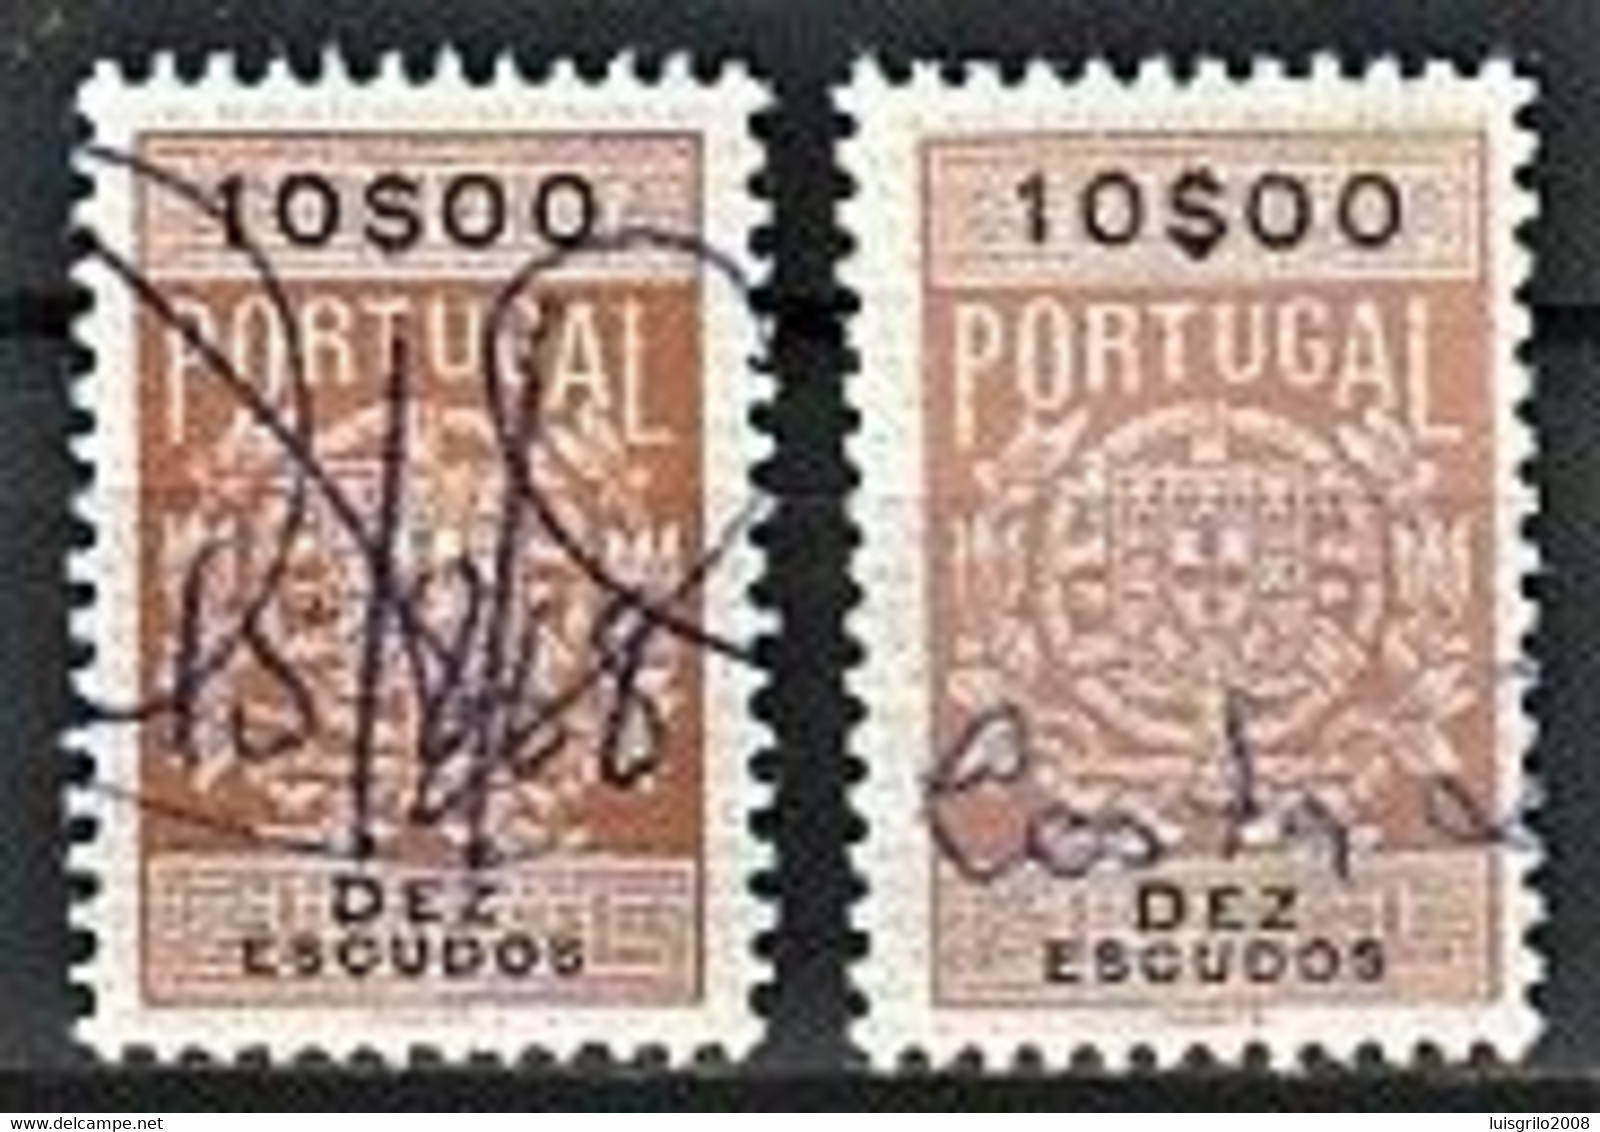 Fiscal/ Revenue, Portugal 1940 - Estampilha Fiscal -|- 10$00 - COLOR VARIANT - Is The Stamp Of The Right - Gebraucht